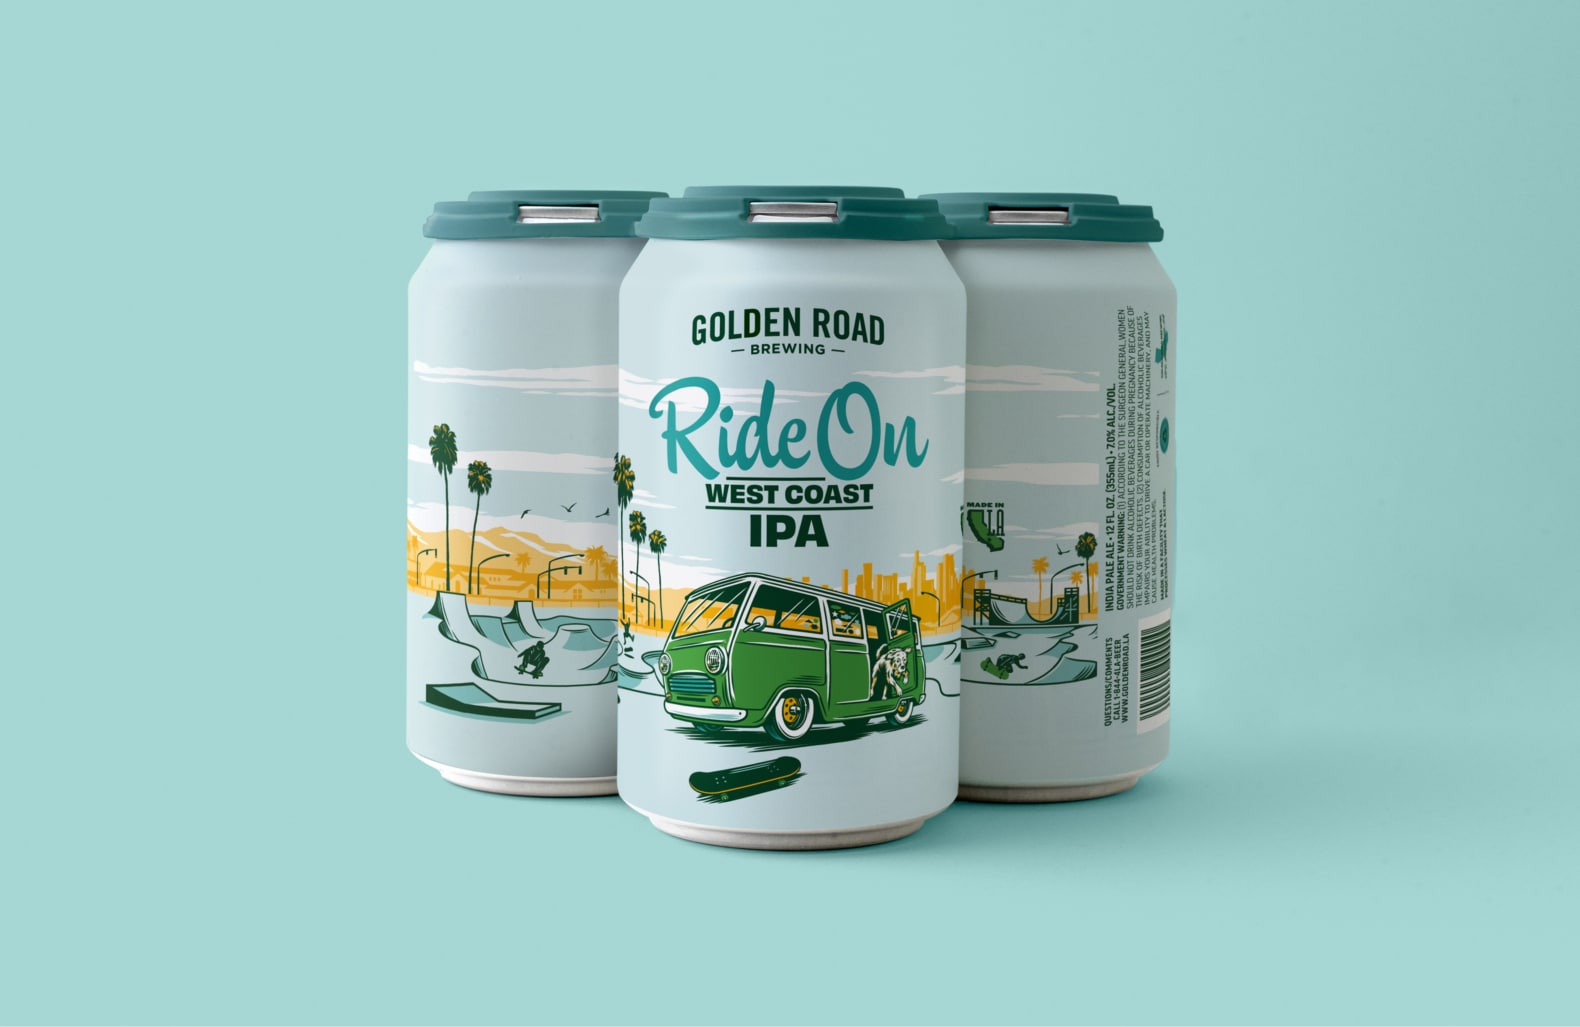 Three cans of Golden Road Ride On West Coast IPA against a light aqua background. The can is light blue with an illustration of a vintage green van parked in front of a skate park with palm trees and a city skyline in the background. A dog leaps from the van toward a dark green skateboard. The beer name "Ride On West Coast IPA" is shown in a dark aqua script and dark green block letters.